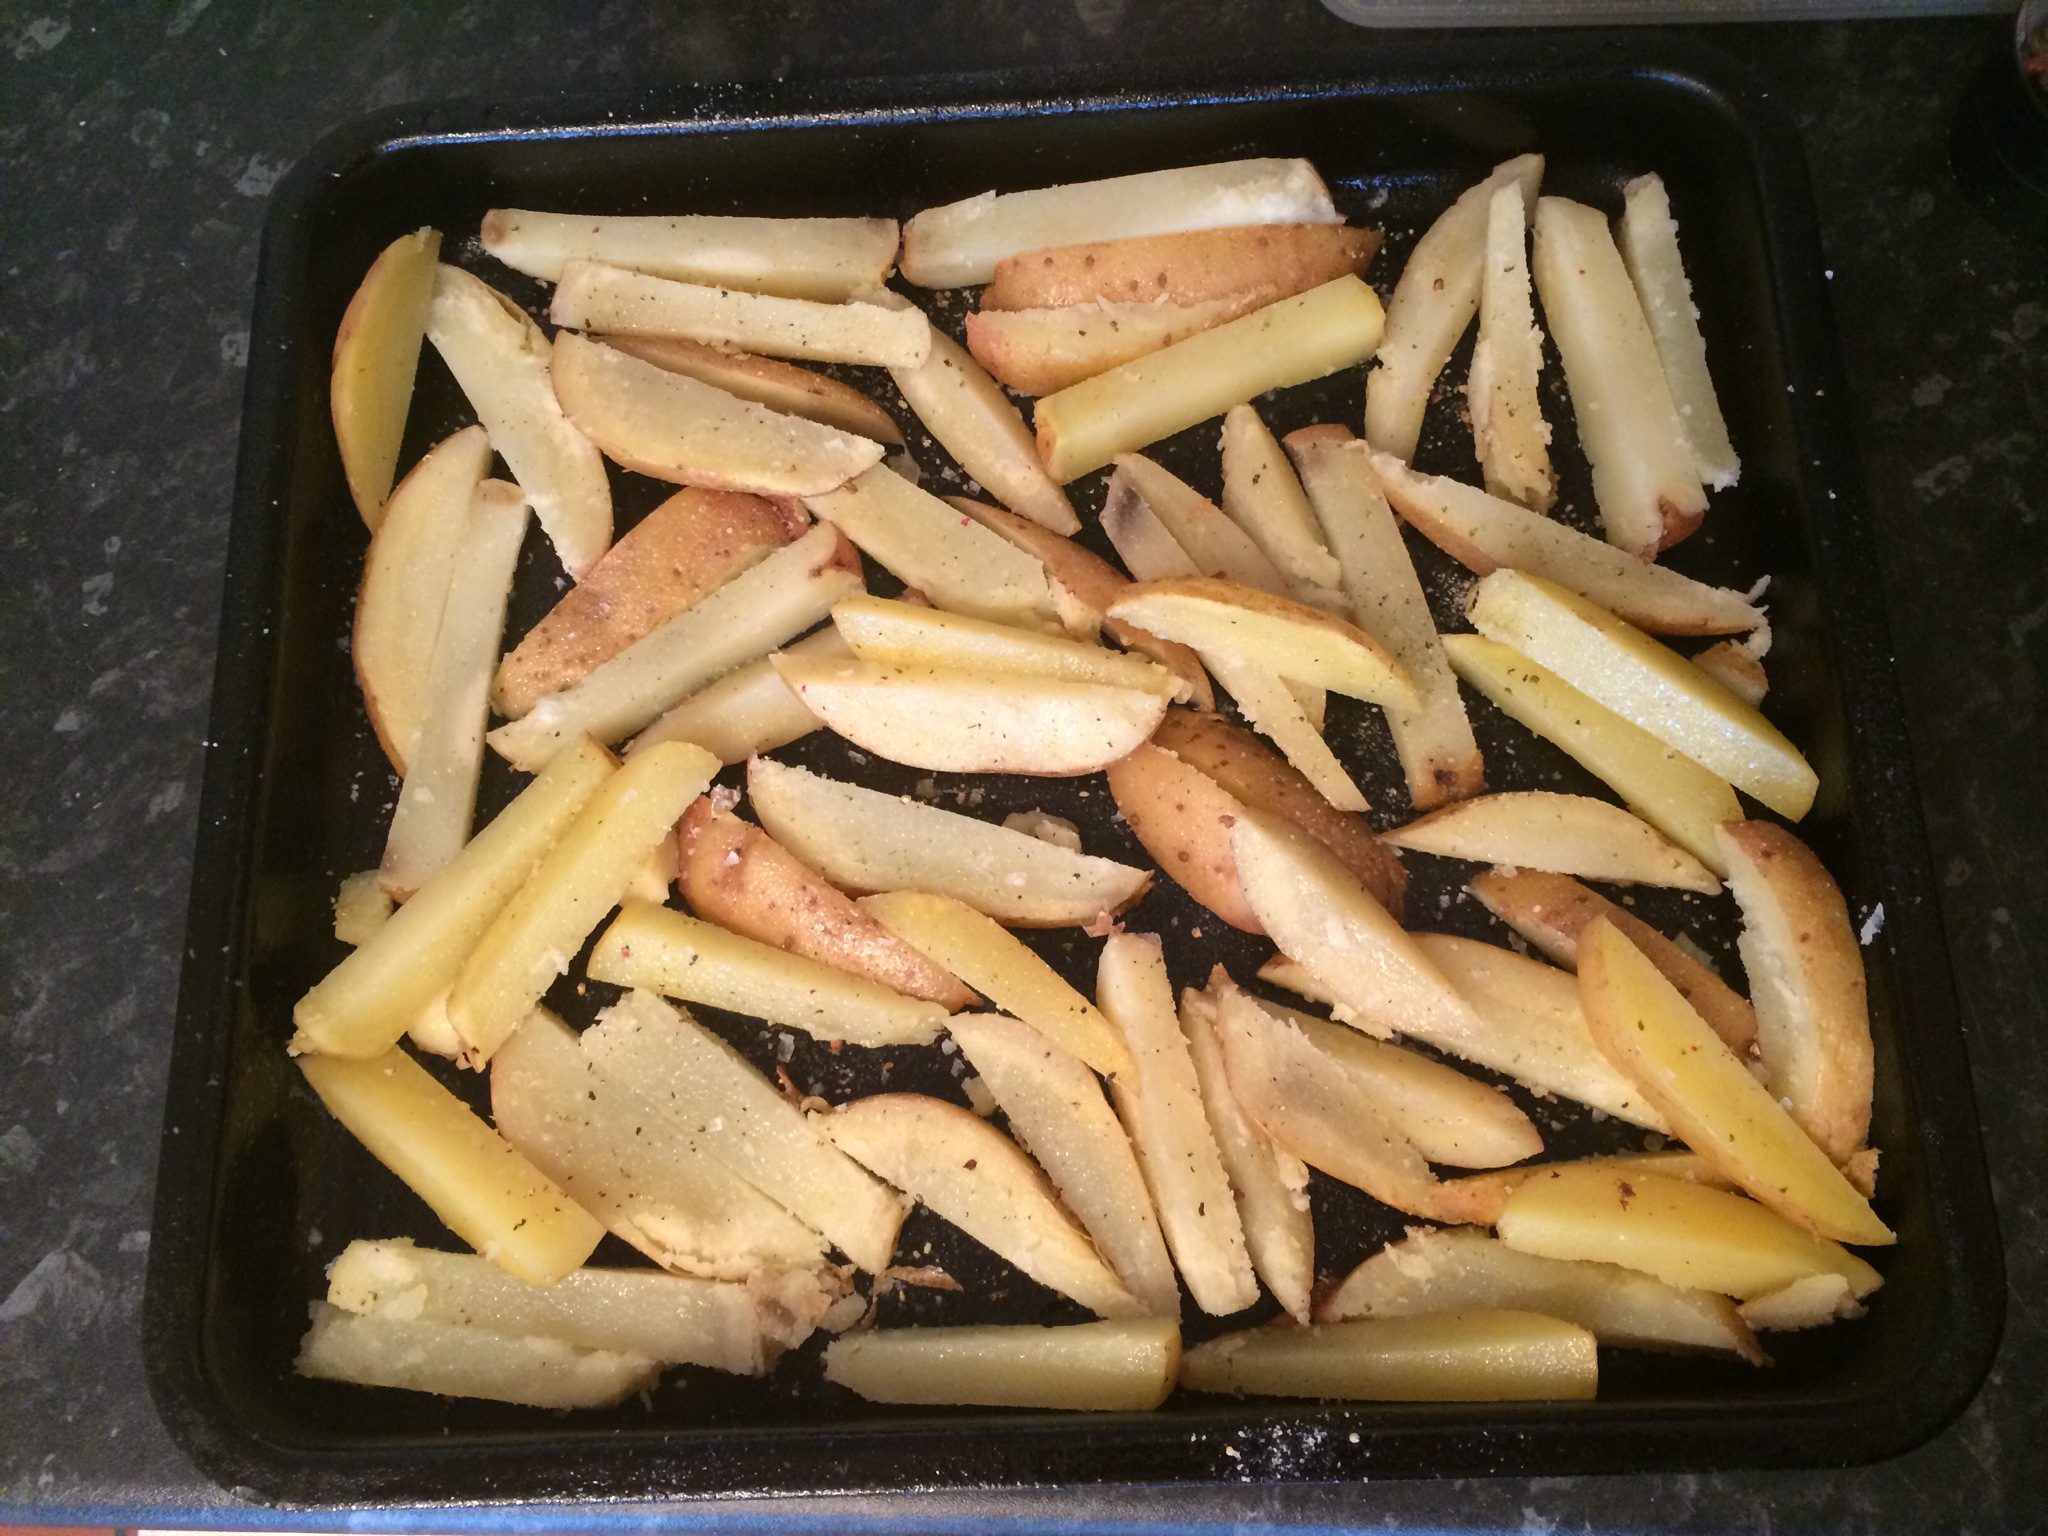 Put chips on a baking tray spayed with FryLight. Don't worry if they wont quite all fit in one layer, they shrink while cooking. Spay with Frylight and add whatever seasonings you like. I most often use sea salt and pepper, but another favourite is garlic salt.